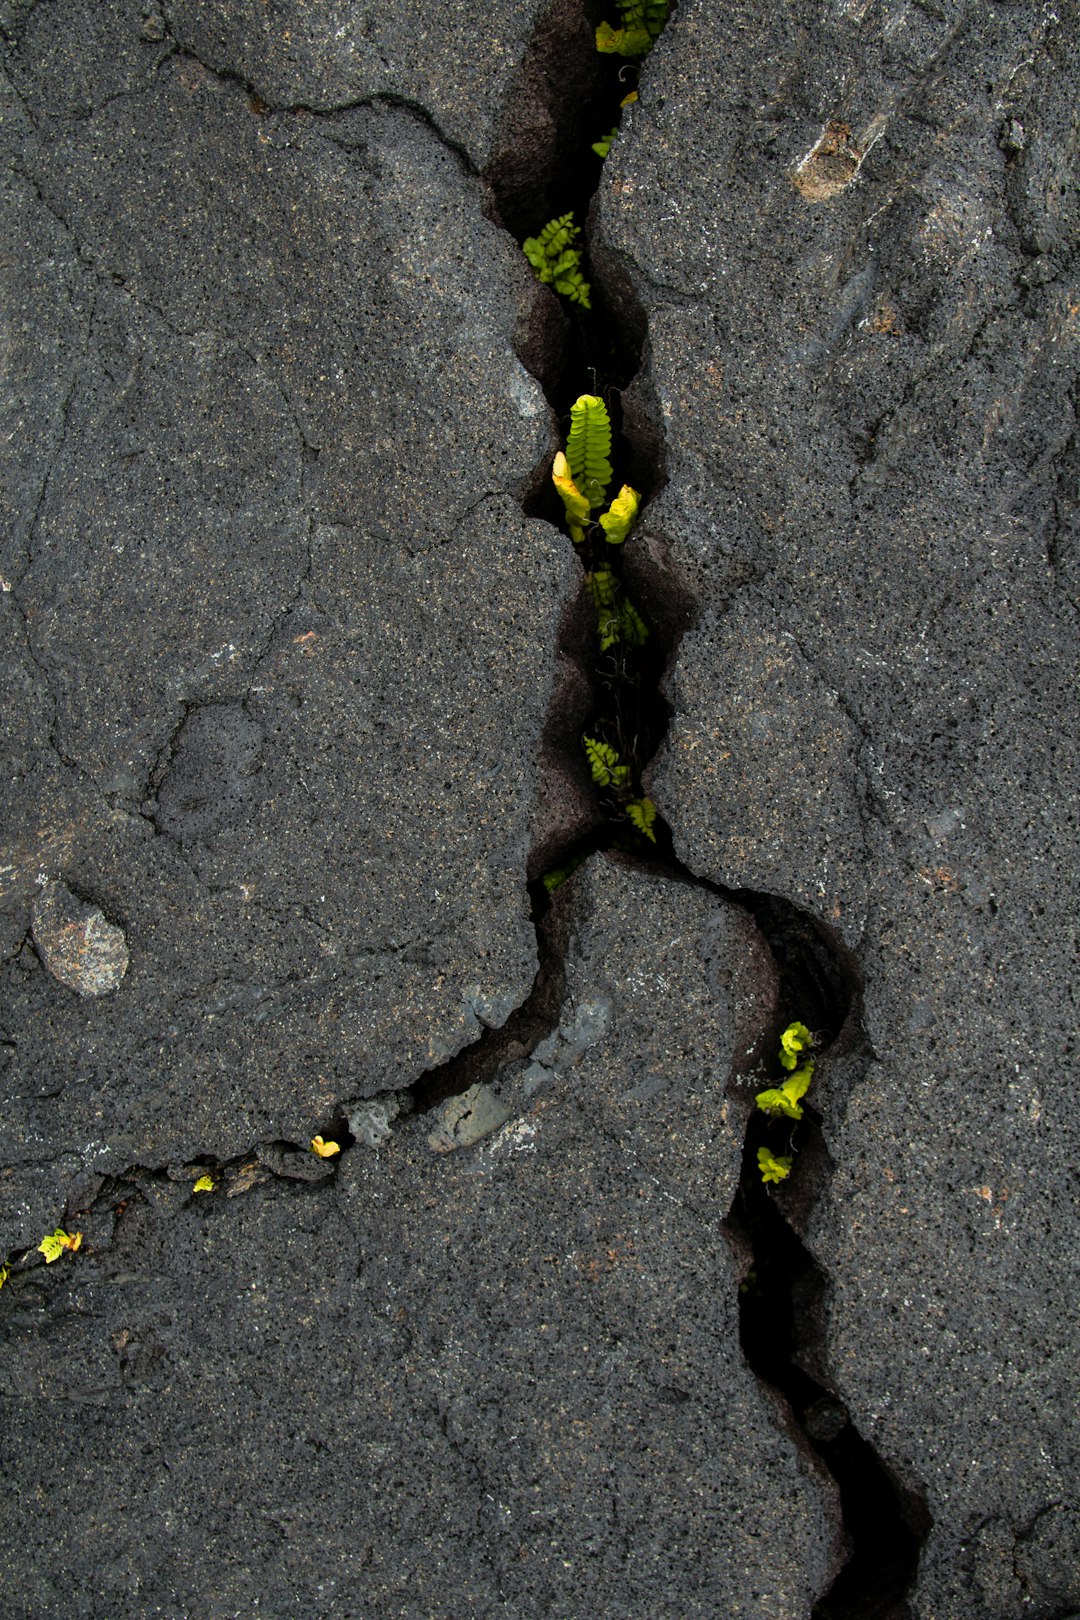 black and yellow snake on gray concrete pavement